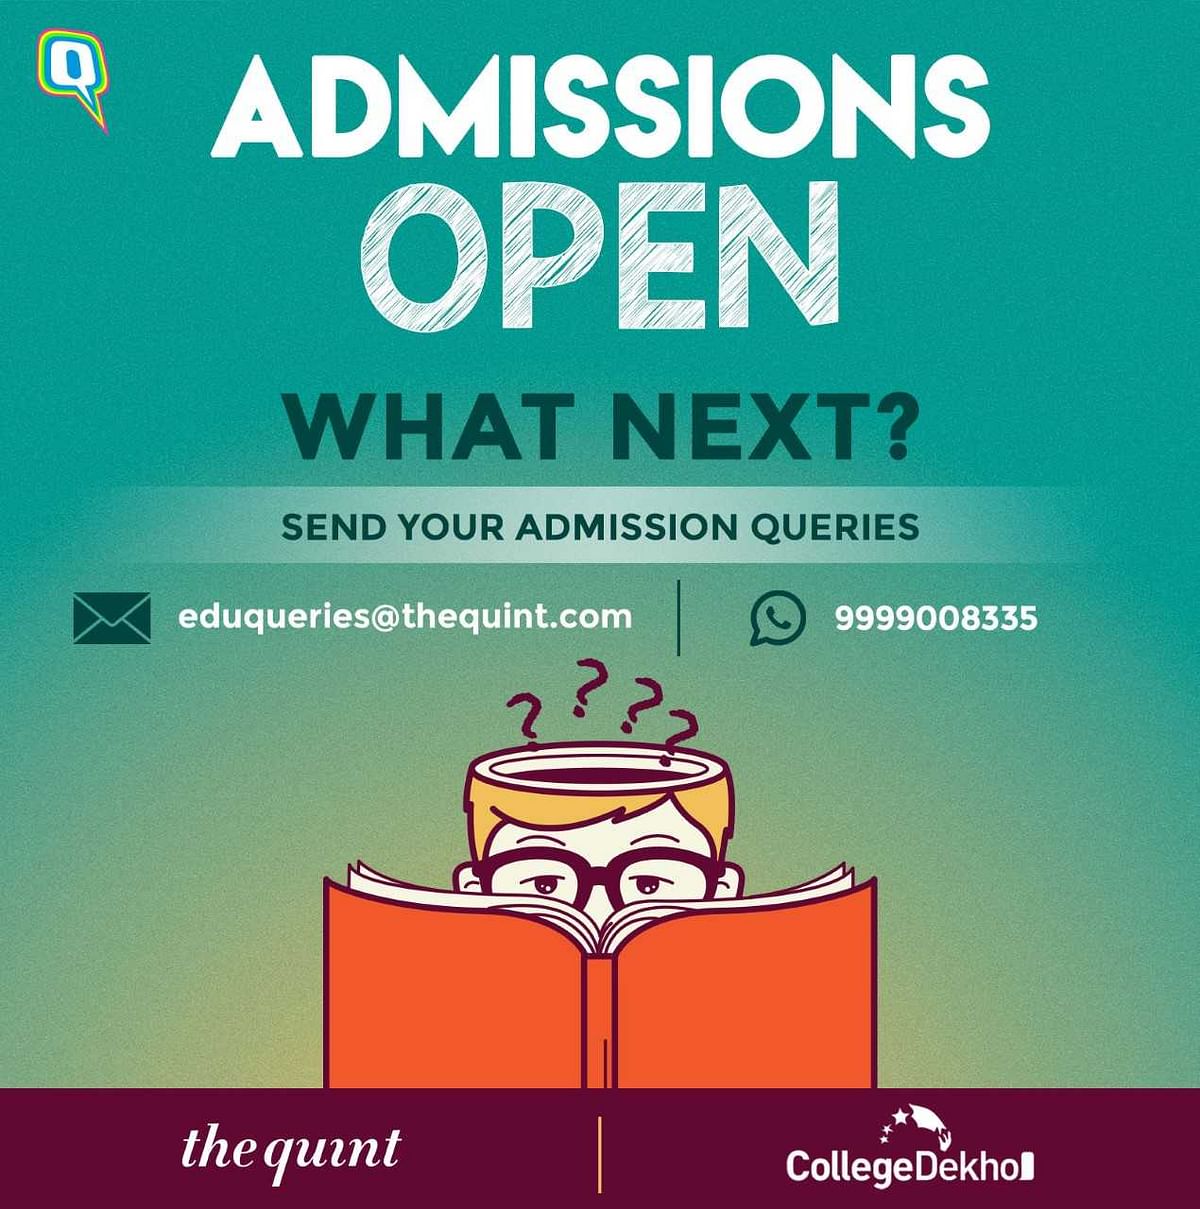 Your admissions-related questions, answered.